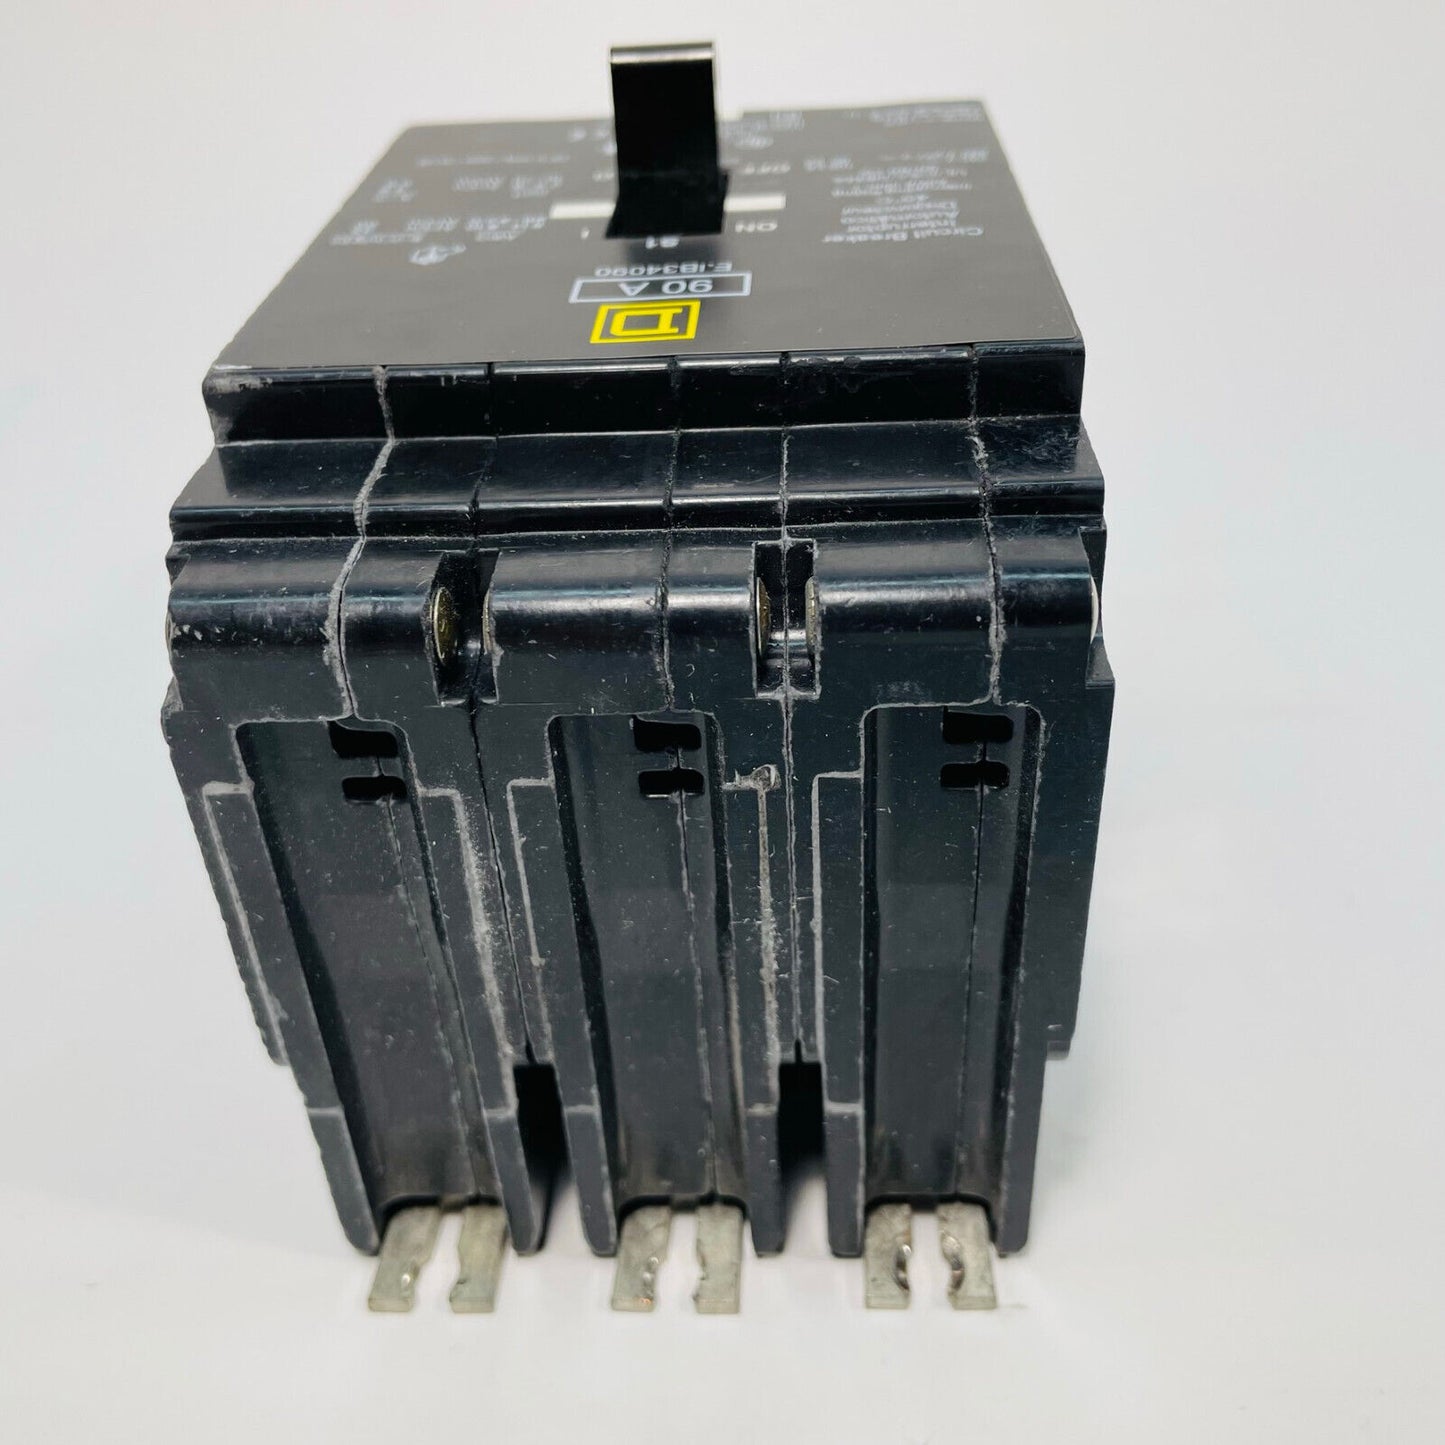 Square D EJB34090 Circuit Breaker 3-Pole 90A New Takeout